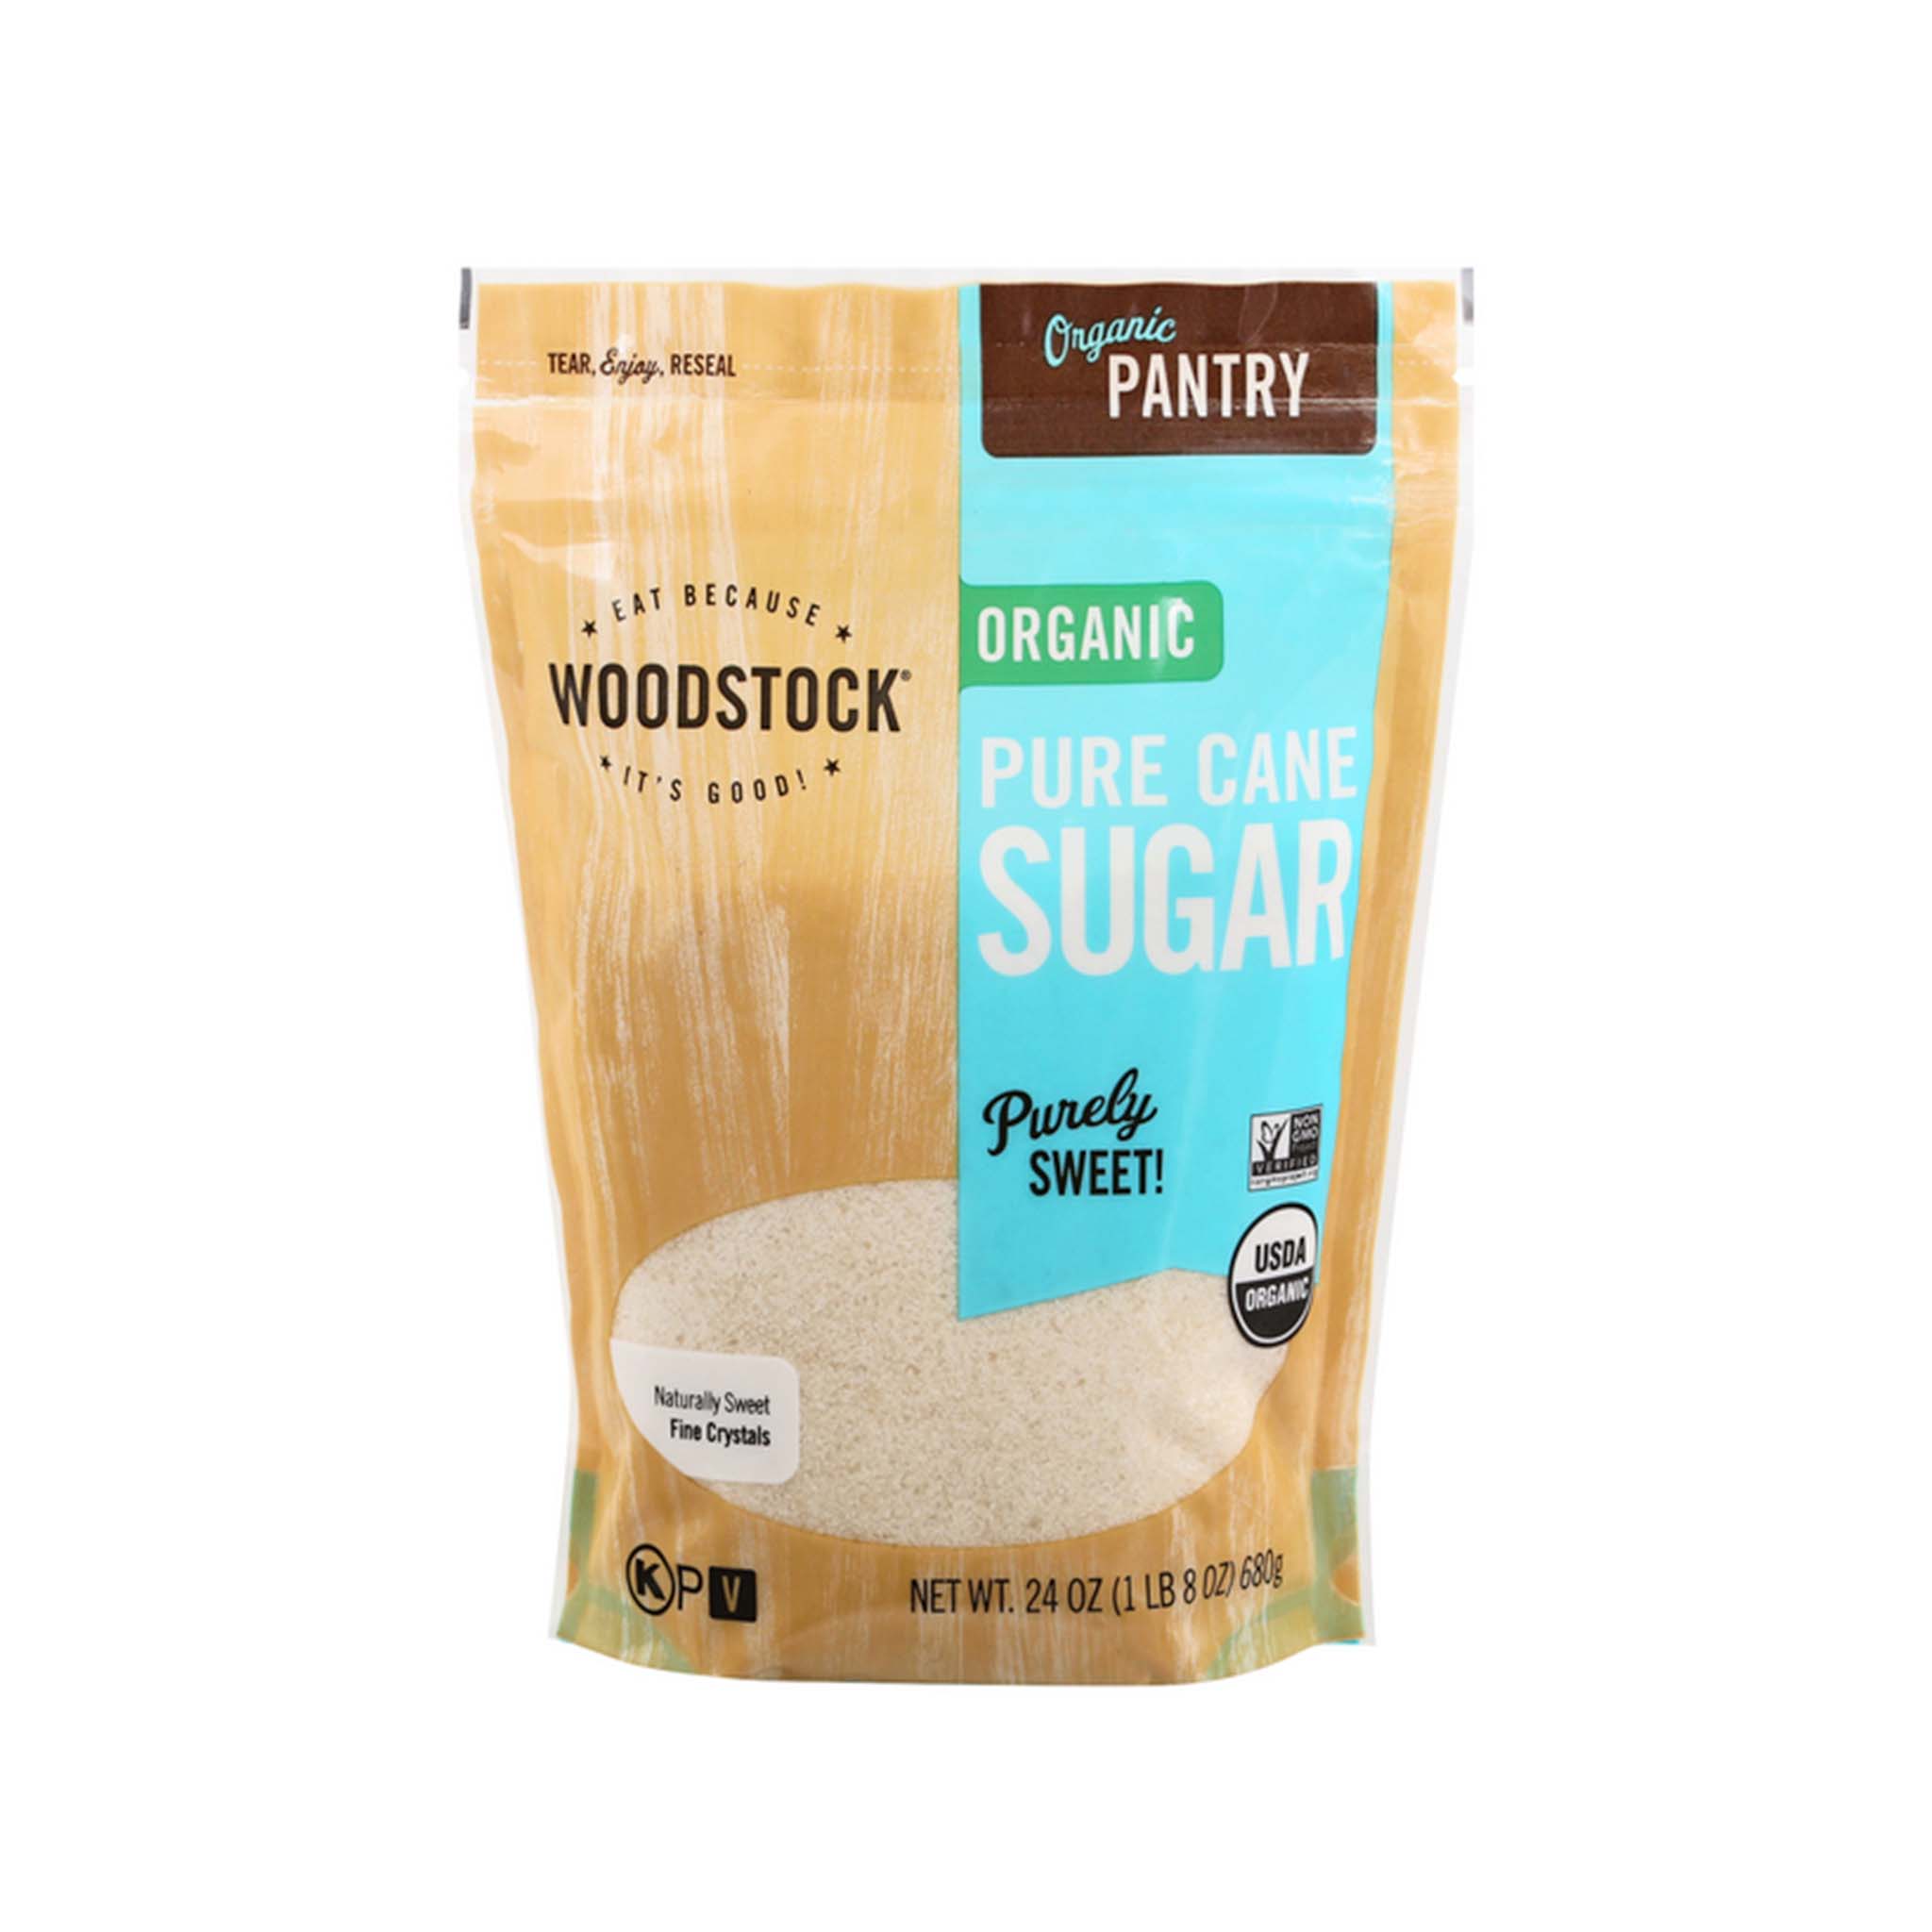 This organic pure cane sugar is ideal for everyday use and will liven up your morning cup of coffee!